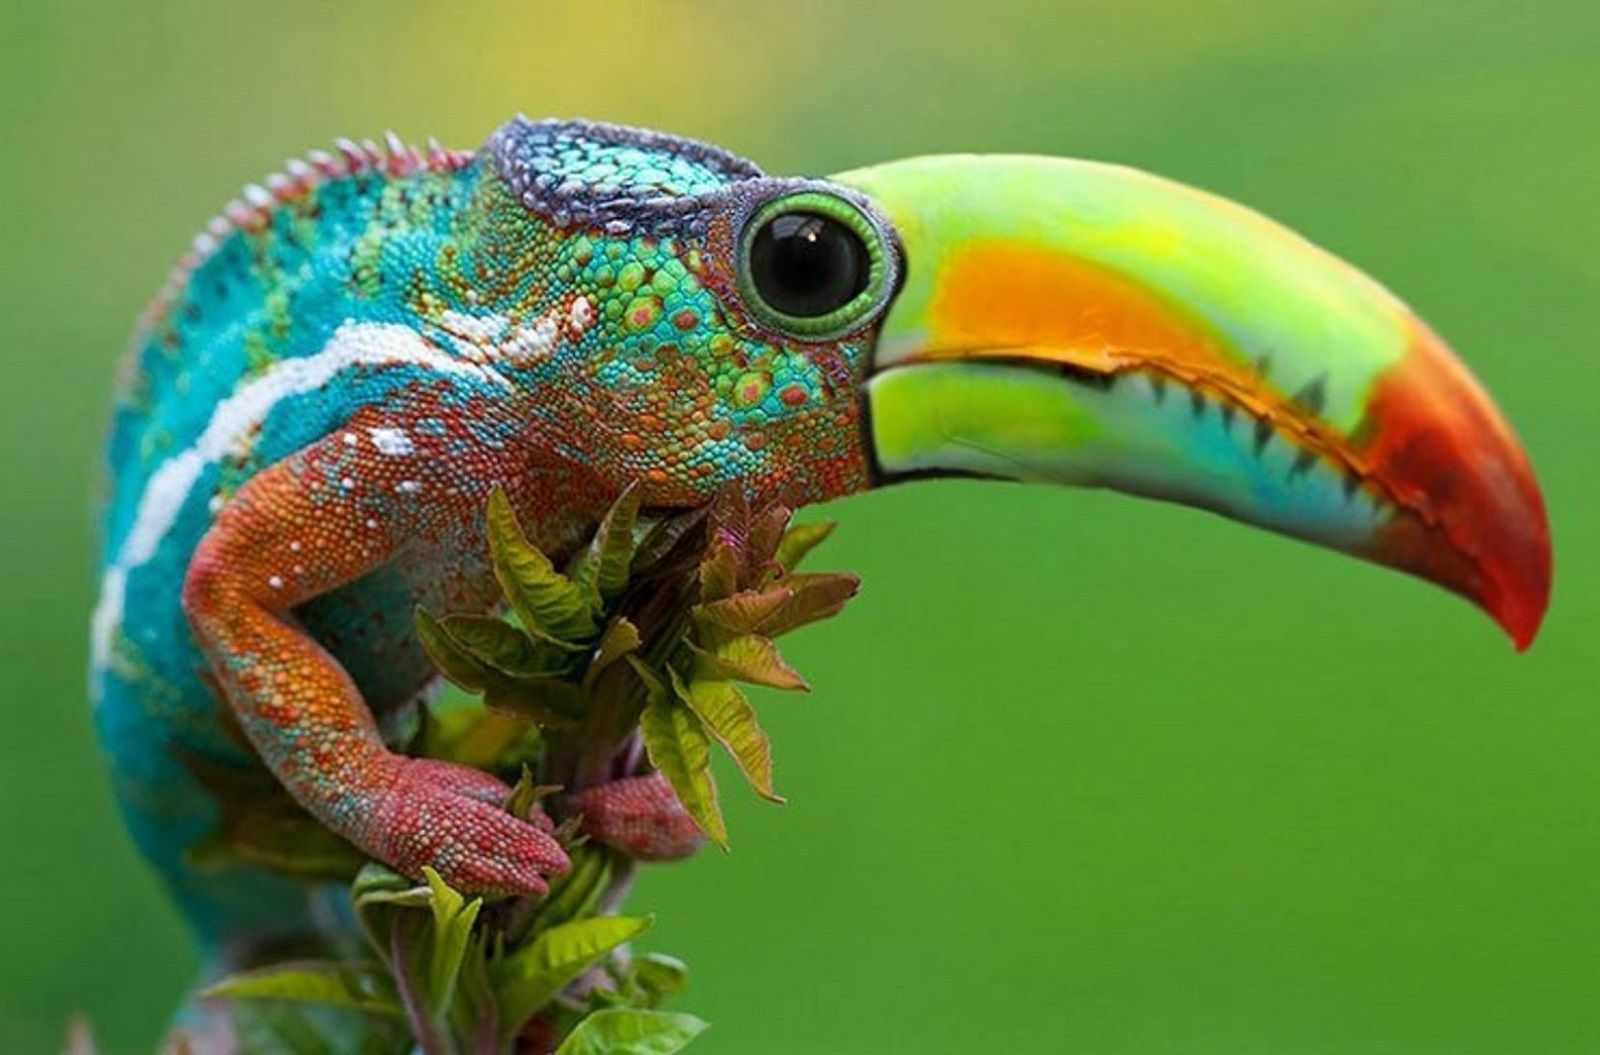 Bonkers new animals imagined with the power of Photoshop image 15